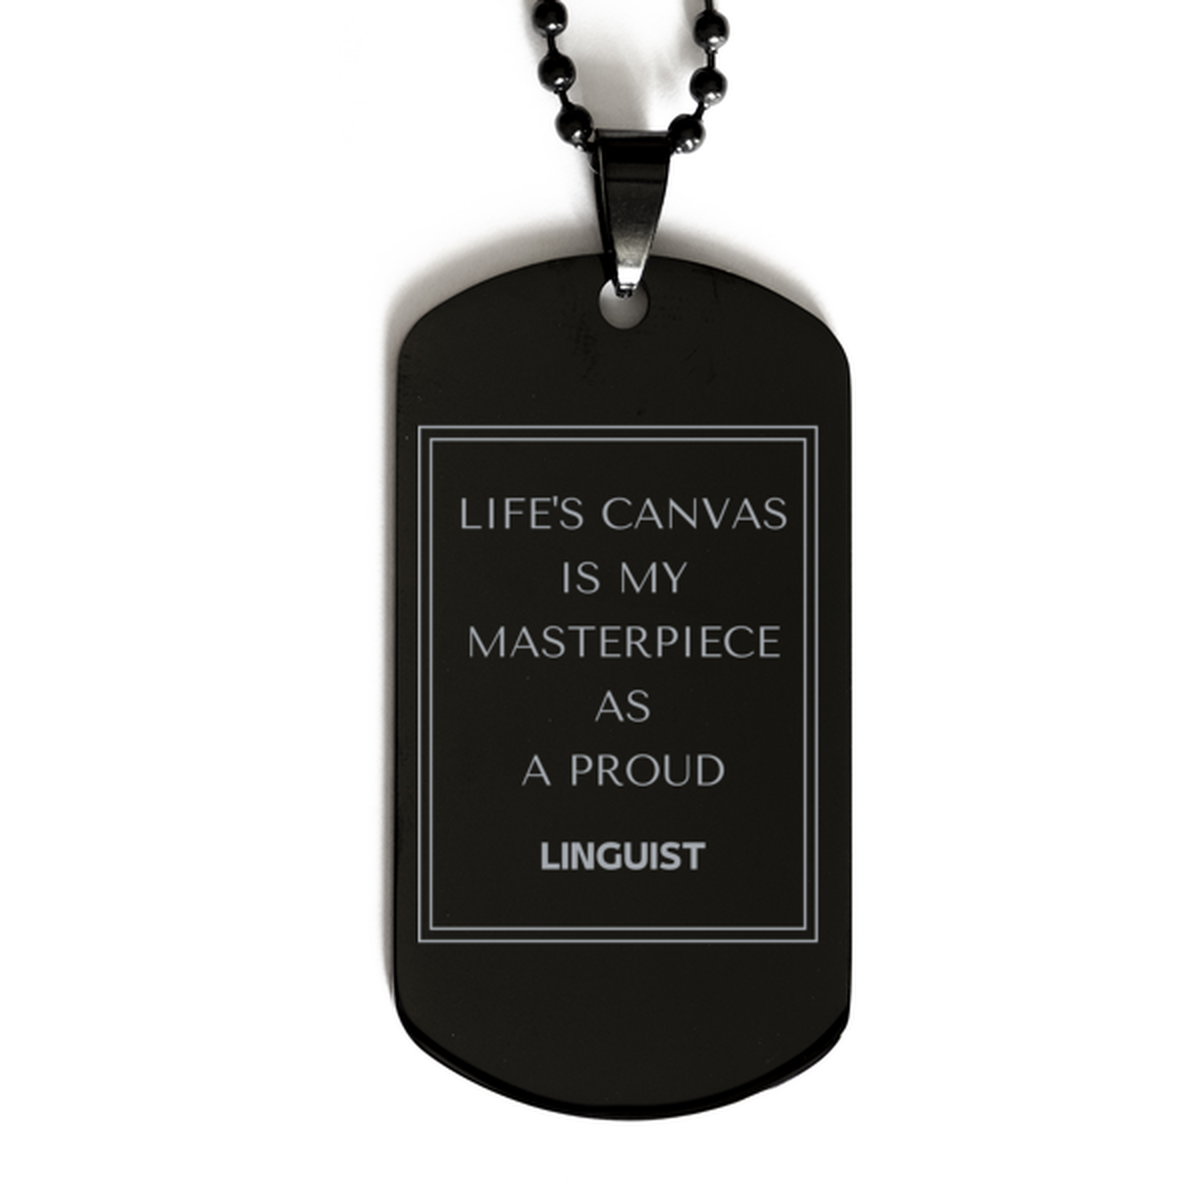 Proud Linguist Gifts, Life's canvas is my masterpiece, Epic Birthday Christmas Unique Black Dog Tag For Linguist, Coworkers, Men, Women, Friends